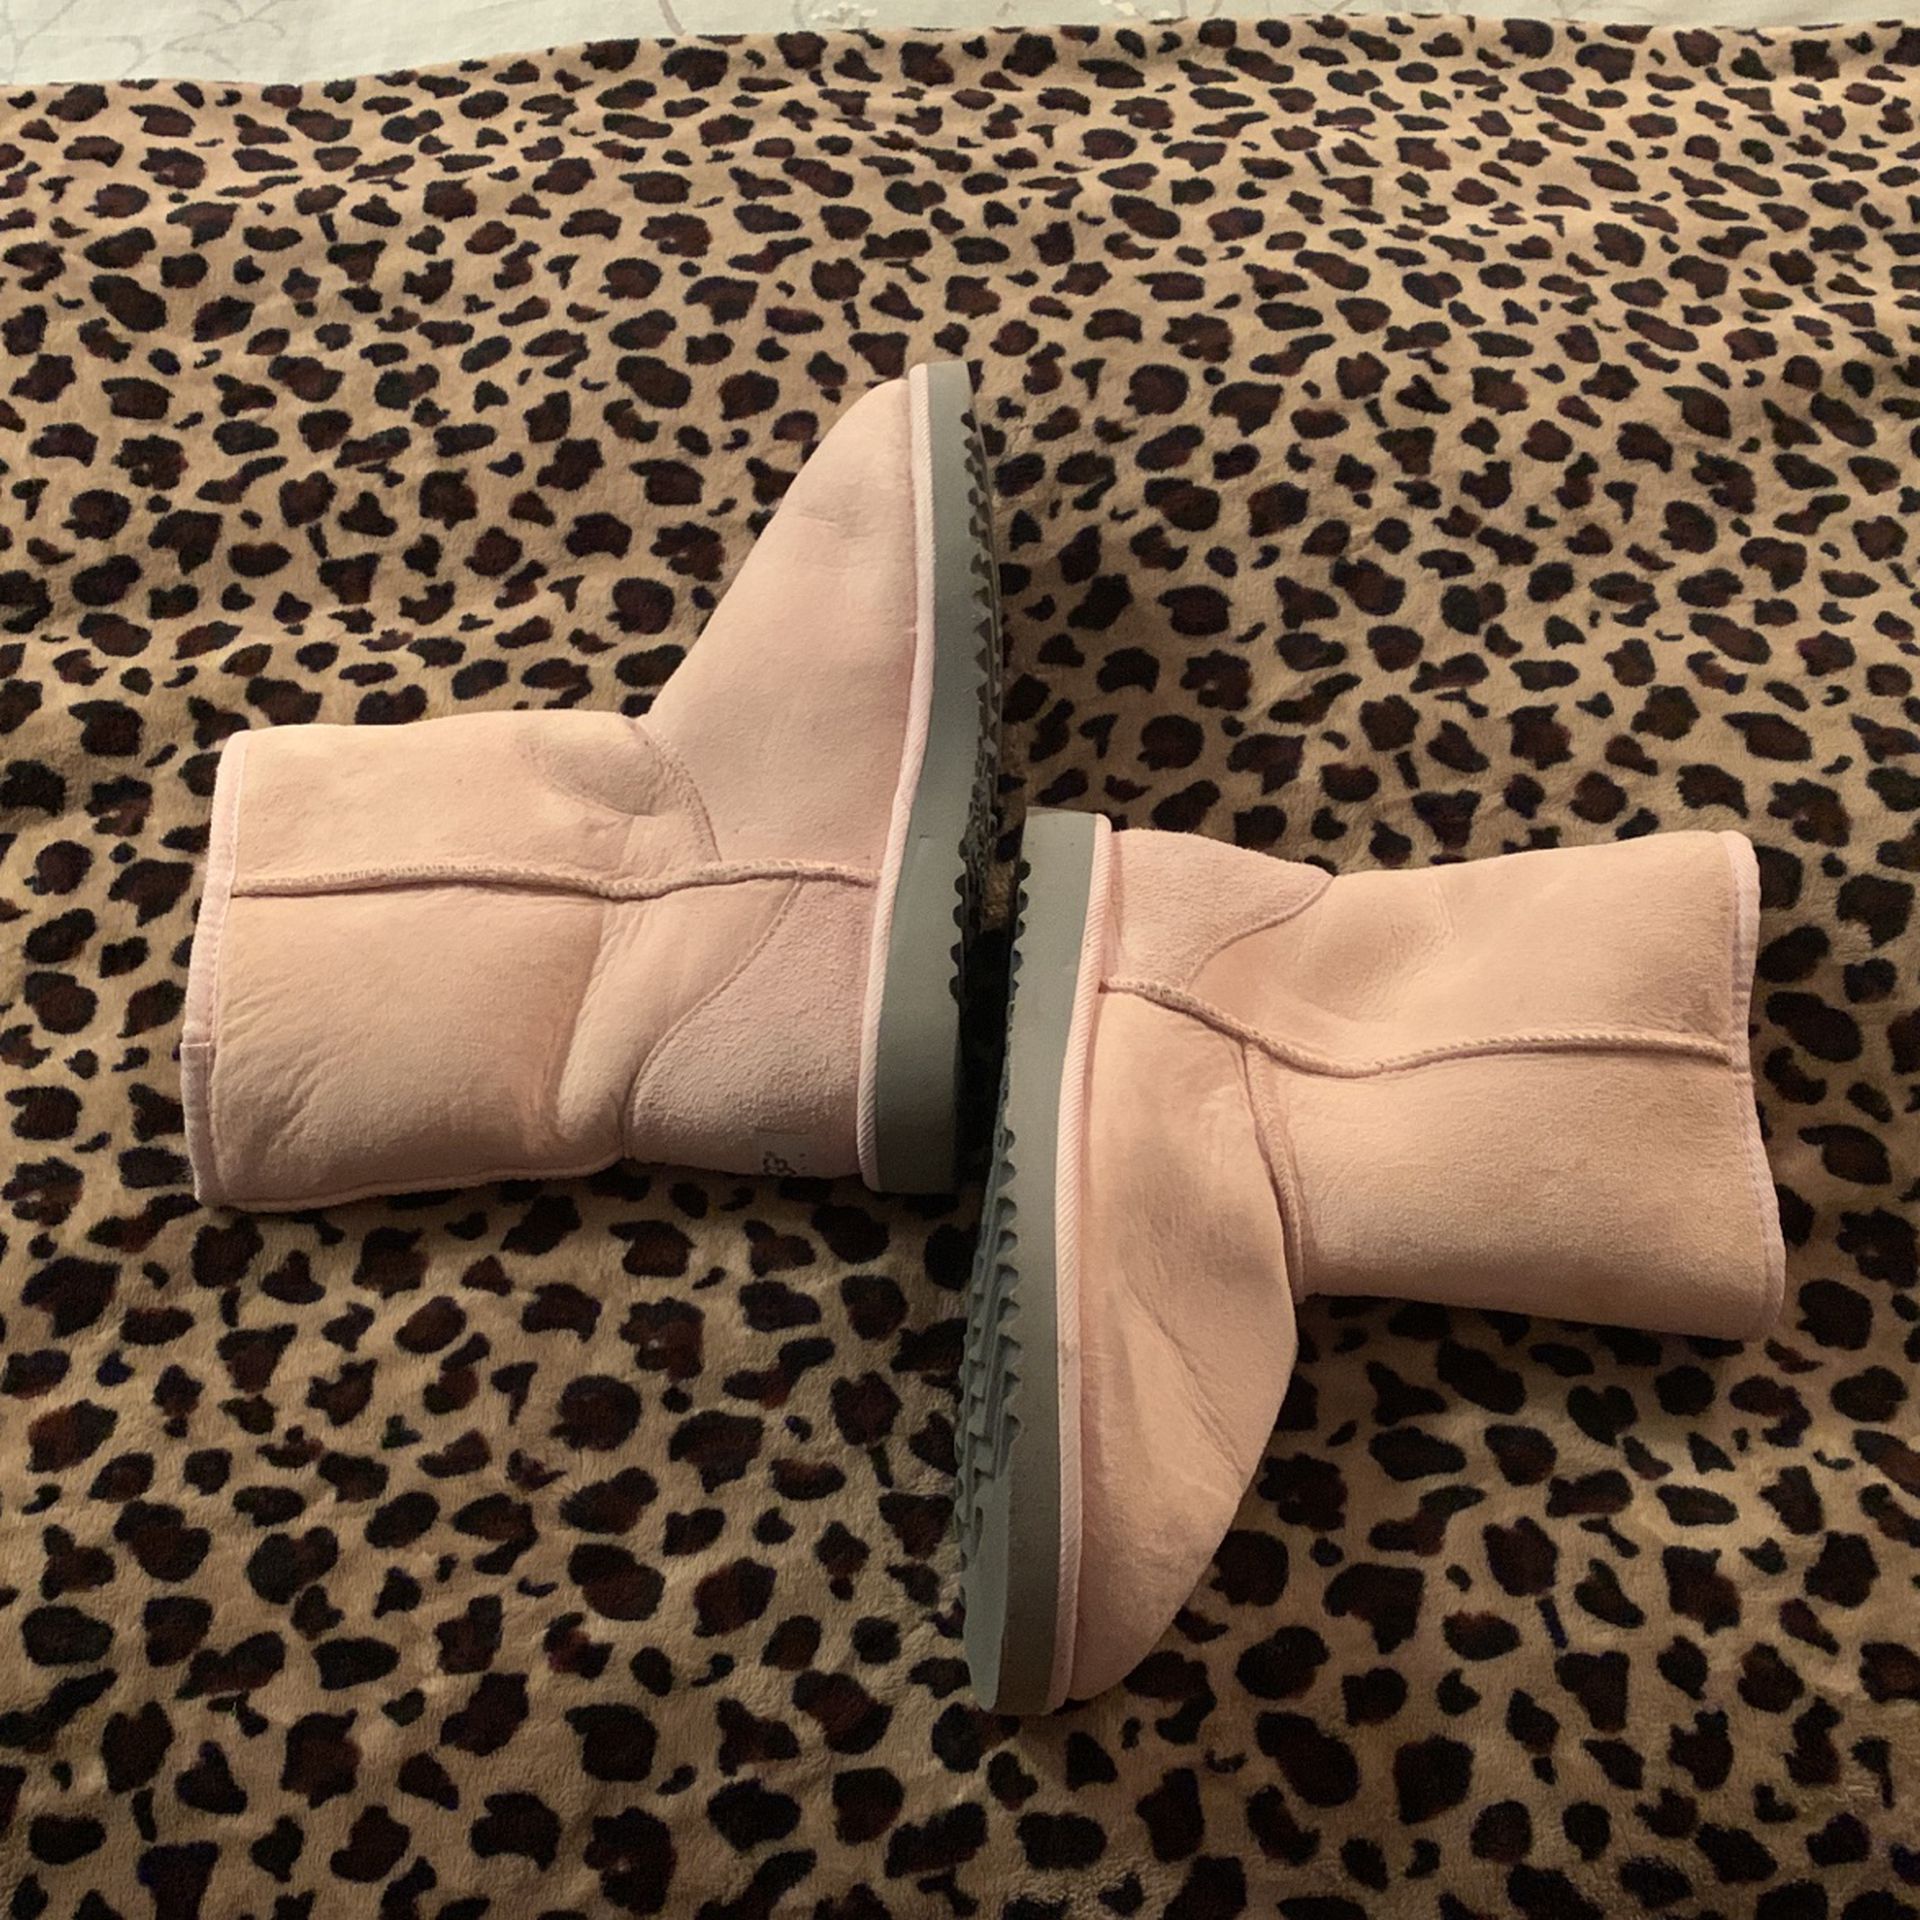 BABY PINK UGG BOOTS SIZE W8 FOR SALE!!